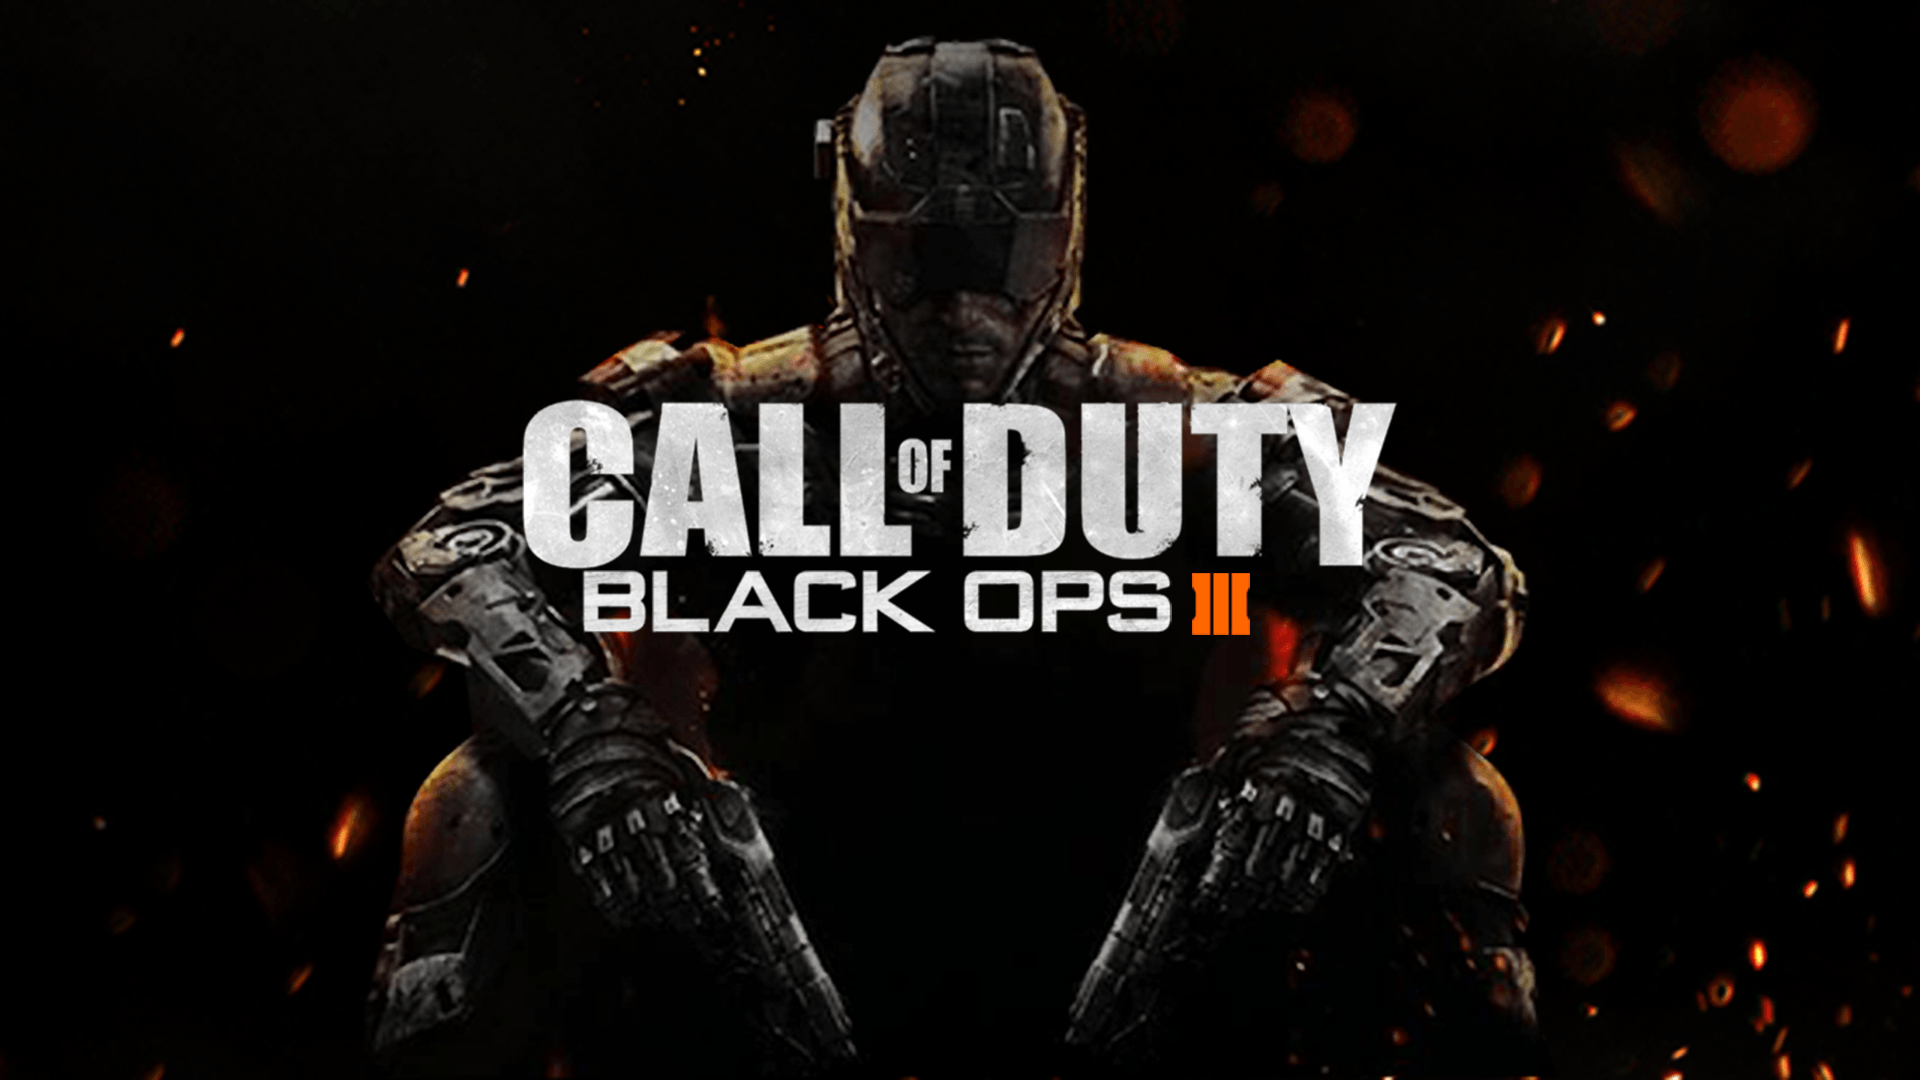 Call Of Duty Black Ops III Wallpapers Wallpaper Cave